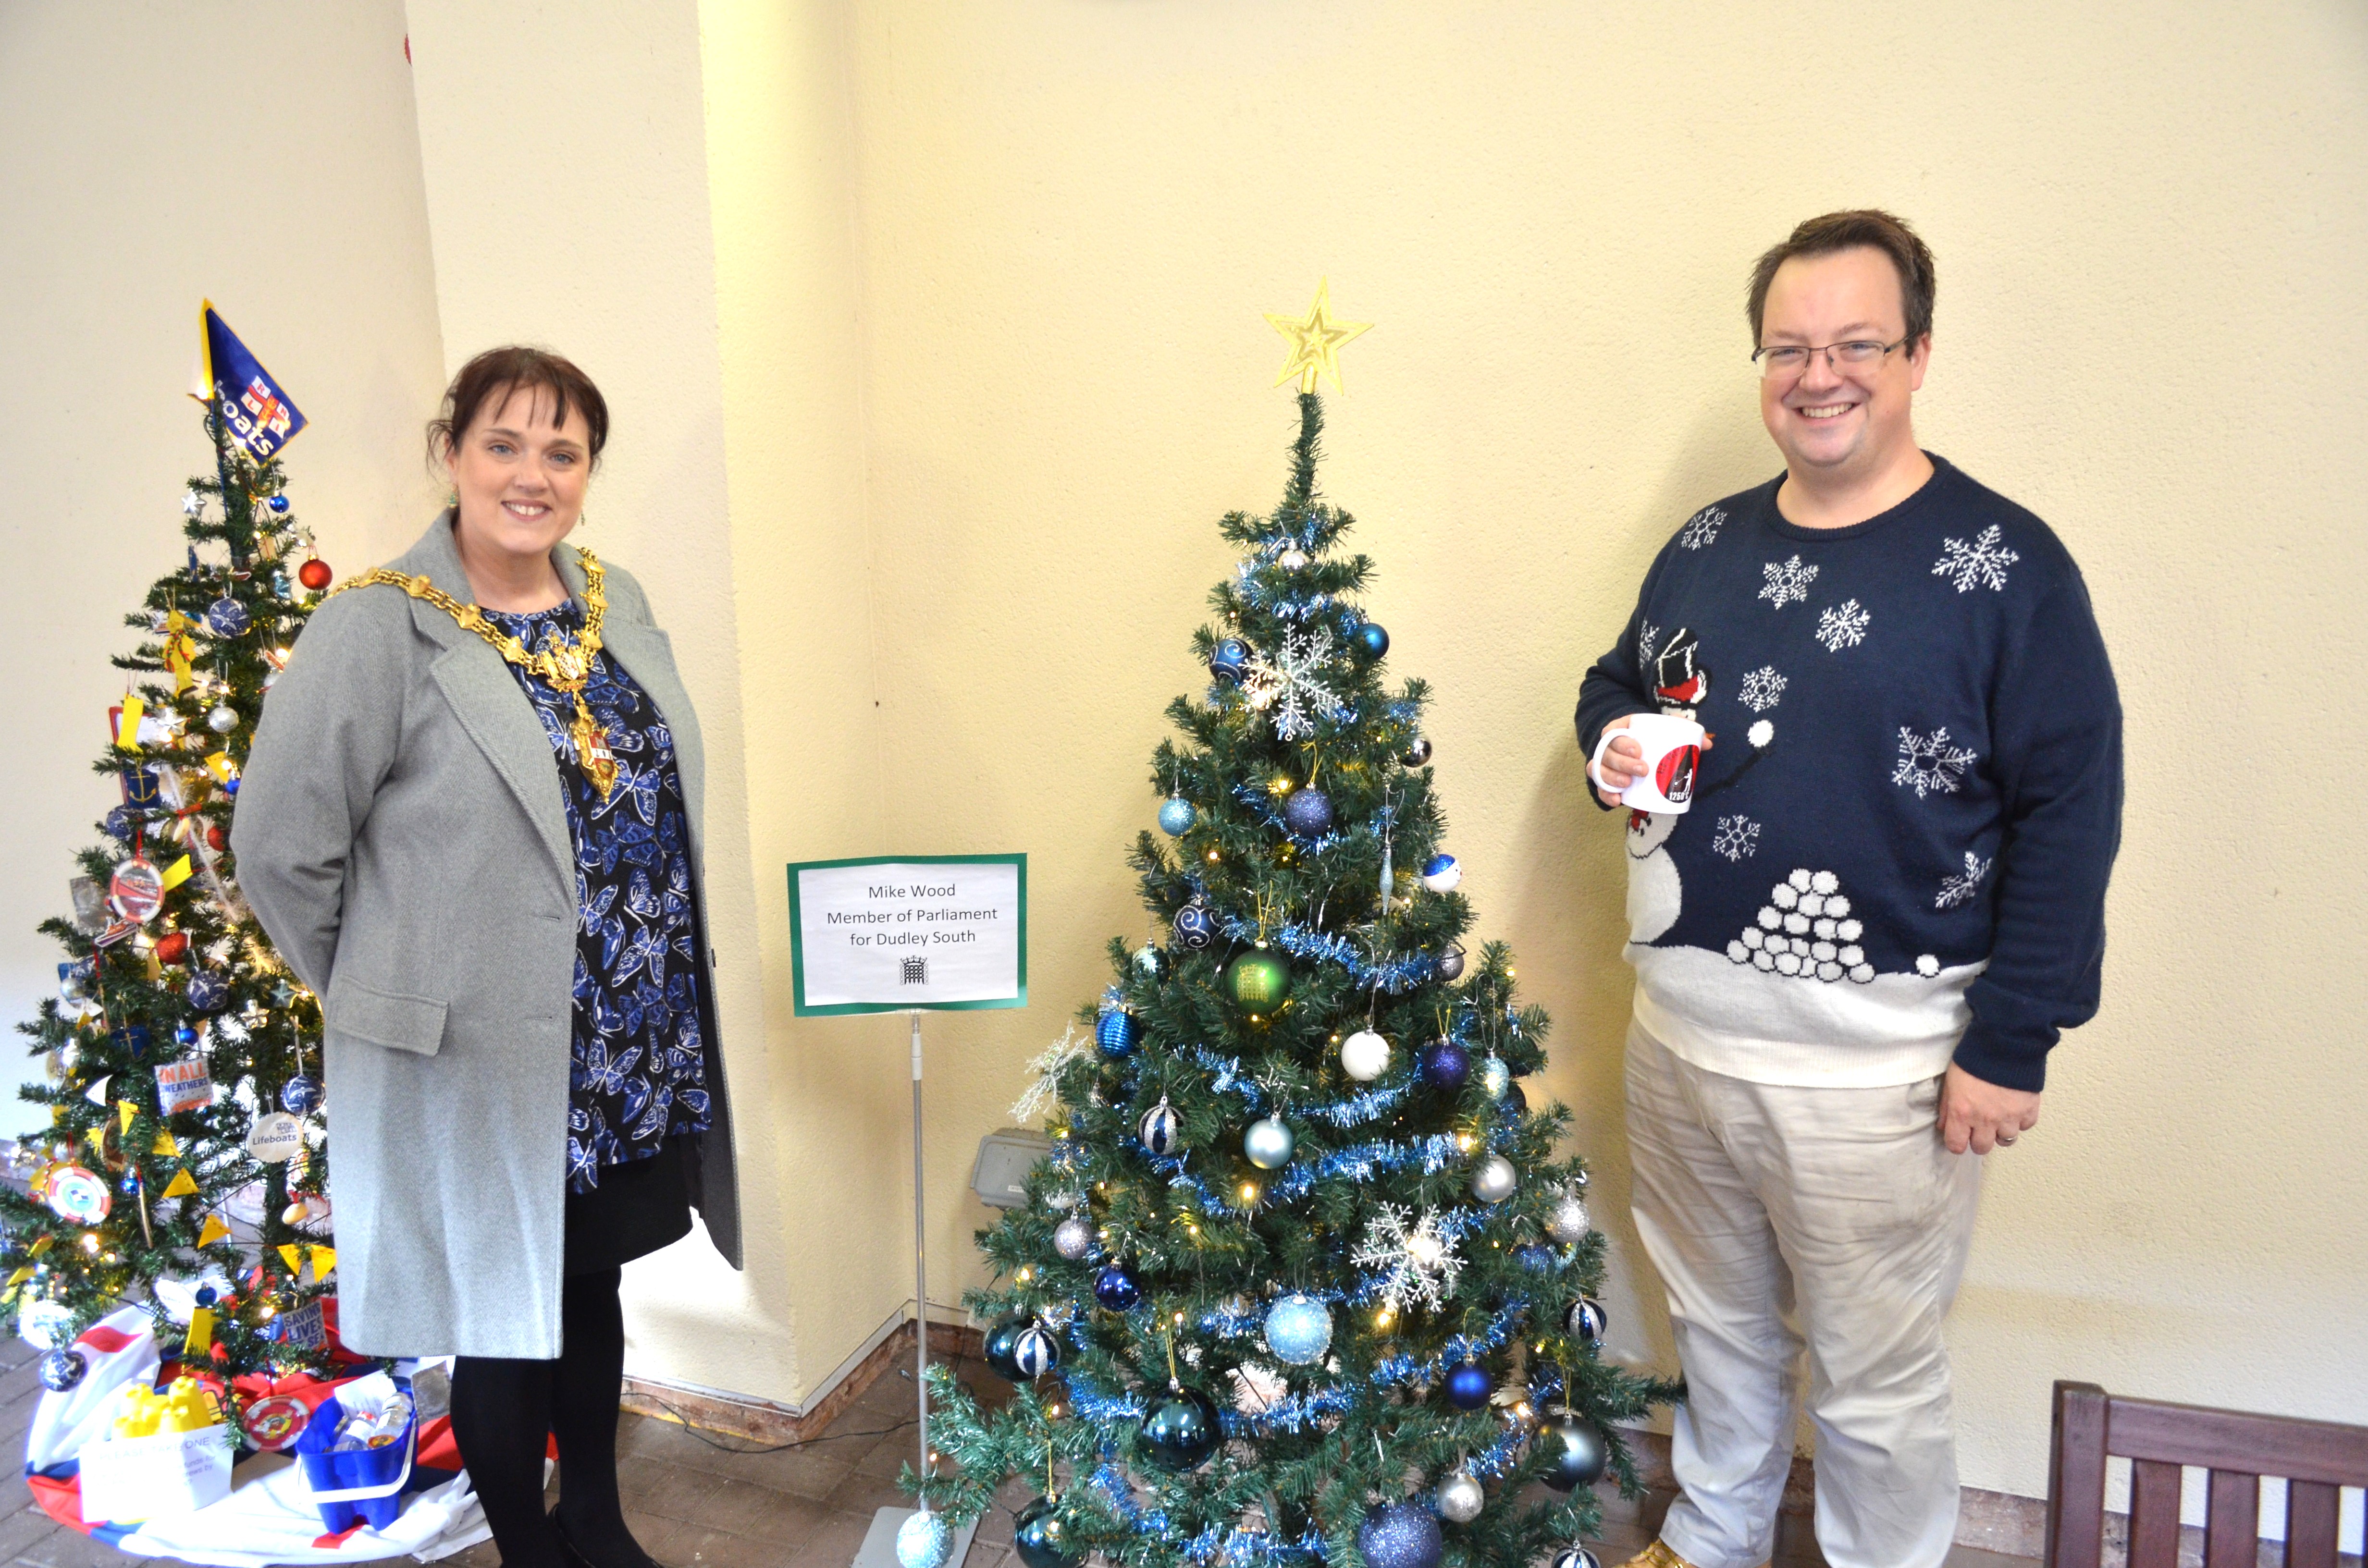 Mike with Mayor of Dudley, Cllr Andrea Goddard, at opening of Red House Glass Cone Christmas tree festival